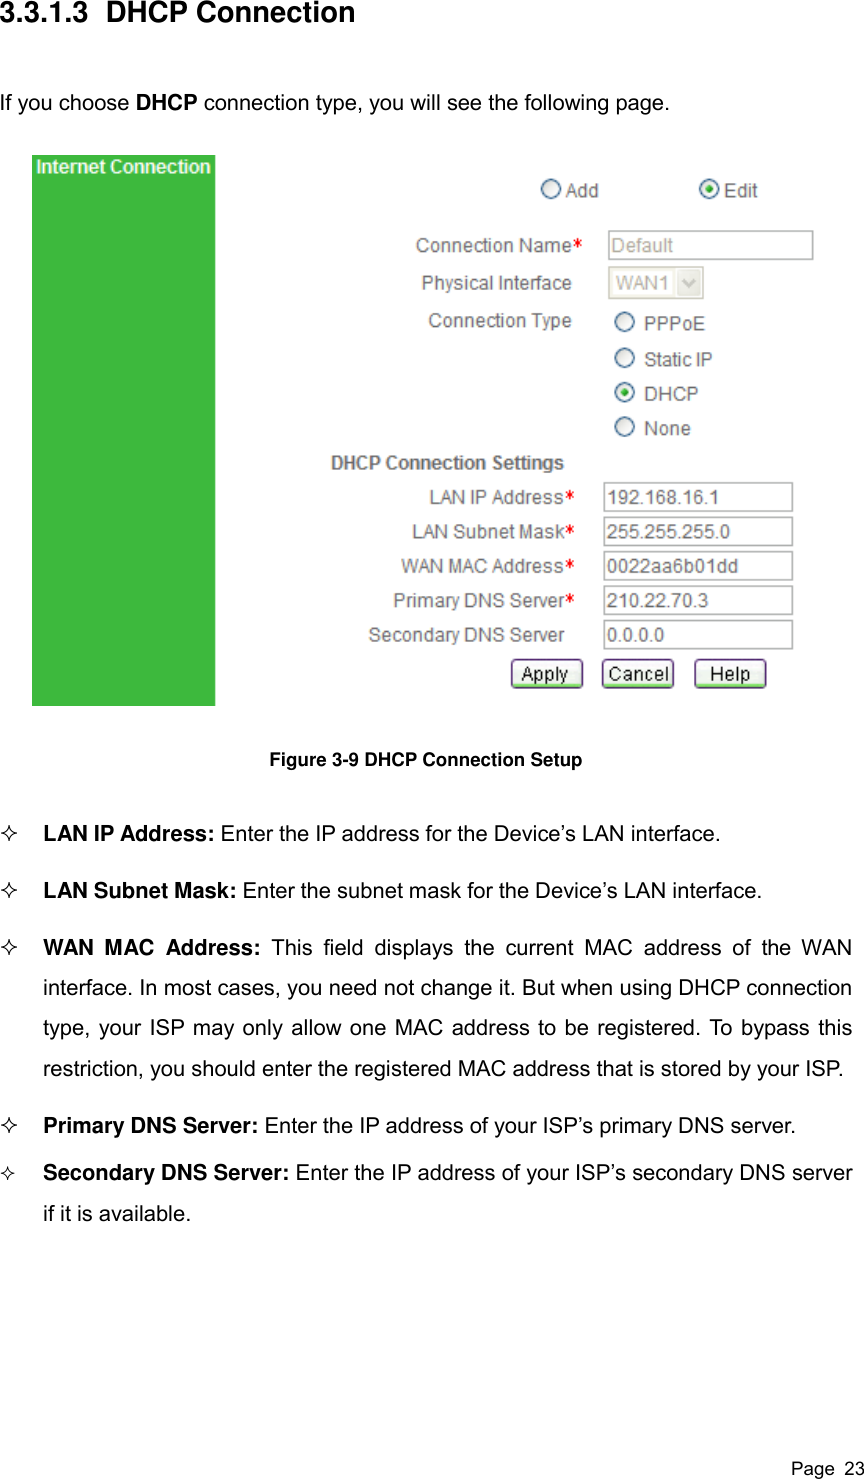  Page  23 3.3.1.3  DHCP Connection If you choose DHCP connection type, you will see the following page.  Figure 3-9 DHCP Connection Setup  LAN IP Address: Enter the IP address for the Device’s LAN interface.  LAN Subnet Mask: Enter the subnet mask for the Device’s LAN interface.  WAN  MAC  Address:  This  field  displays  the  current  MAC  address  of  the  WAN interface. In most cases, you need not change it. But when using DHCP connection type, your ISP may only allow one MAC address to be registered. To bypass this restriction, you should enter the registered MAC address that is stored by your ISP.  Primary DNS Server: Enter the IP address of your ISP’s primary DNS server.  Secondary DNS Server: Enter the IP address of your ISP’s secondary DNS server if it is available.  